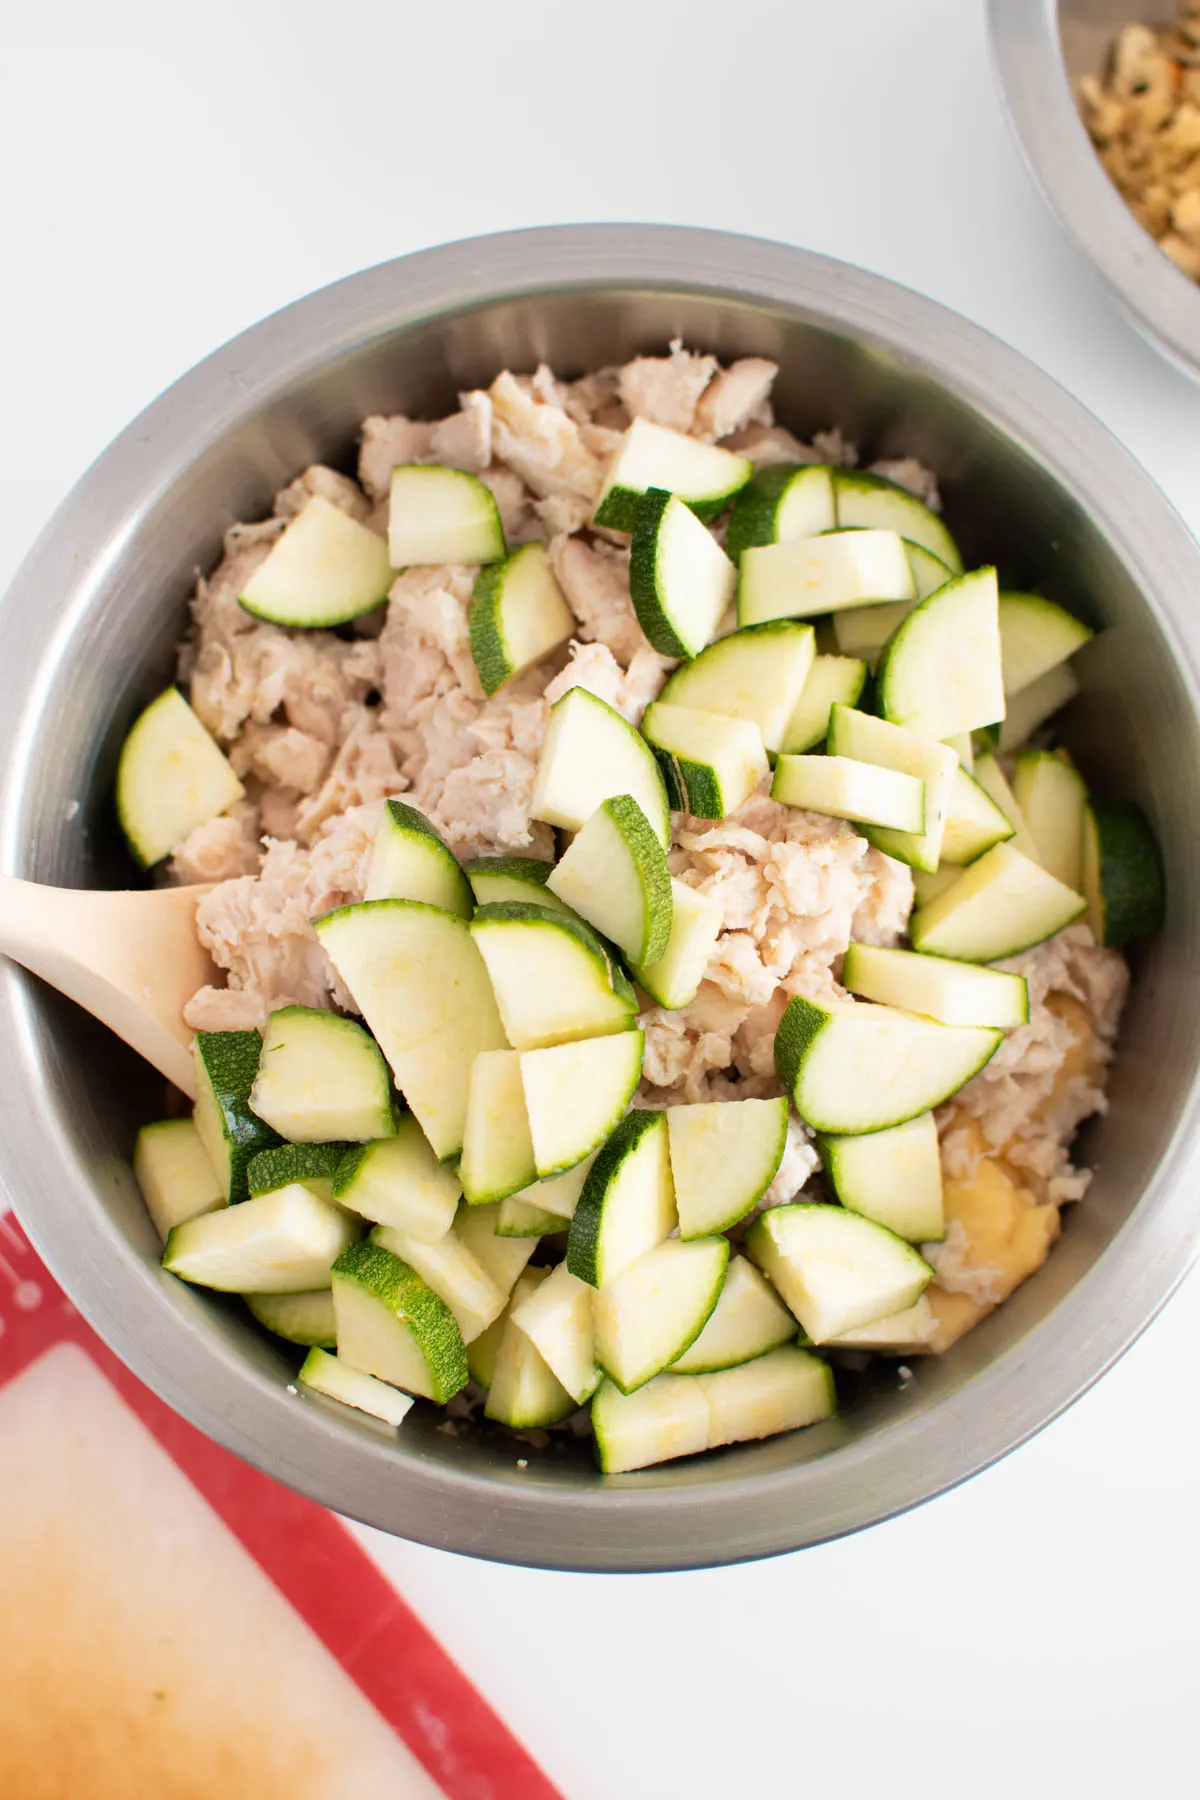 Diced zucchini and rotisserie chicken in metal mixing bowl with wooden spoon.